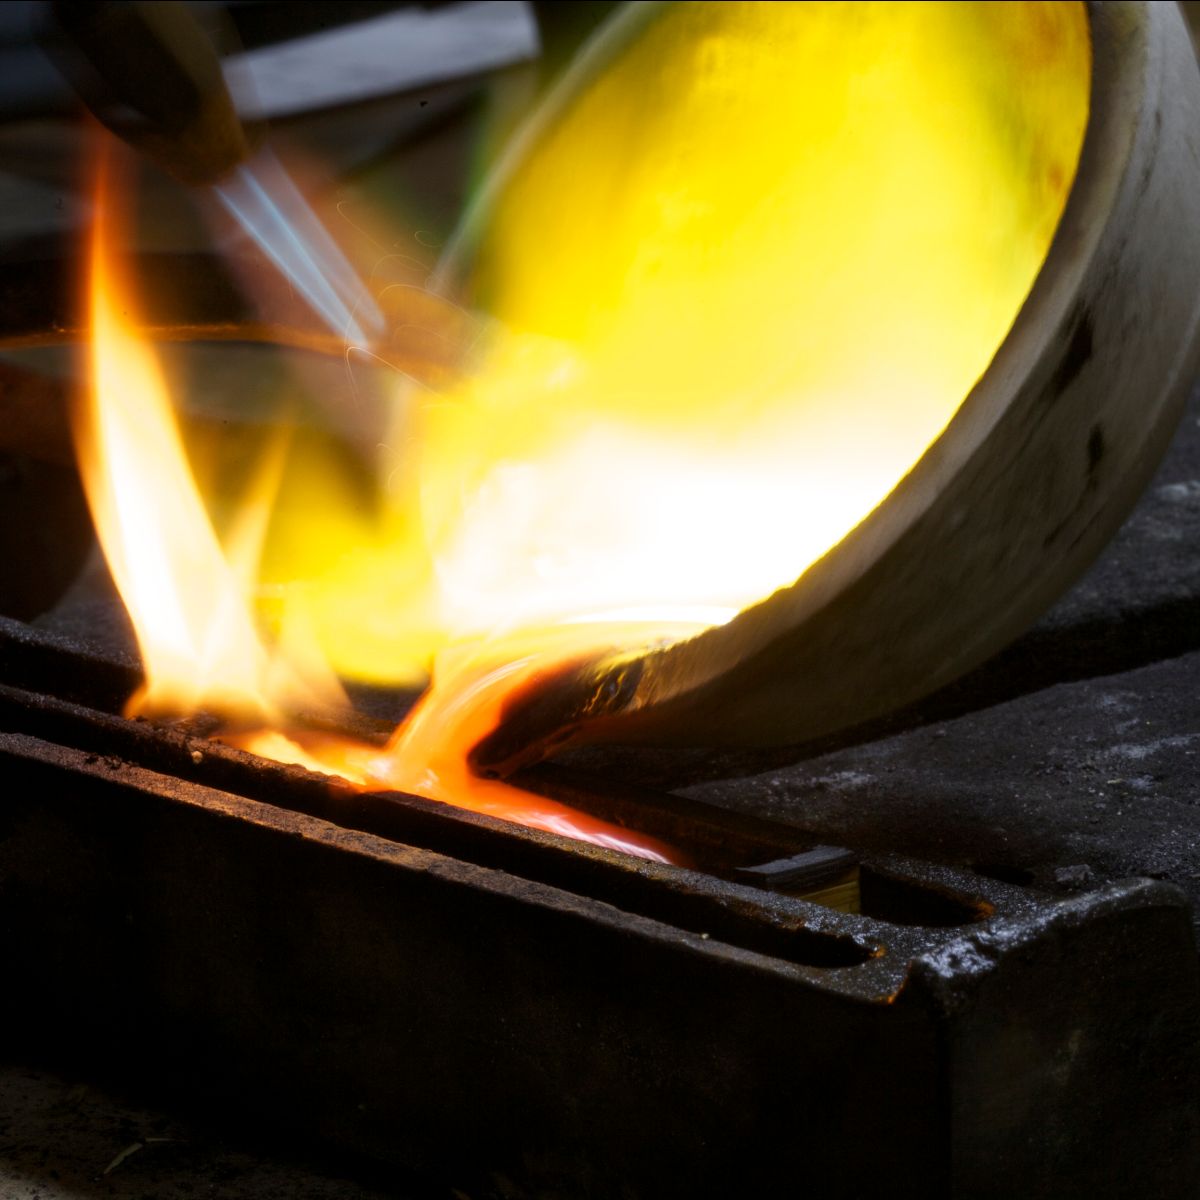 Melting gold and pouring into ingot mould.